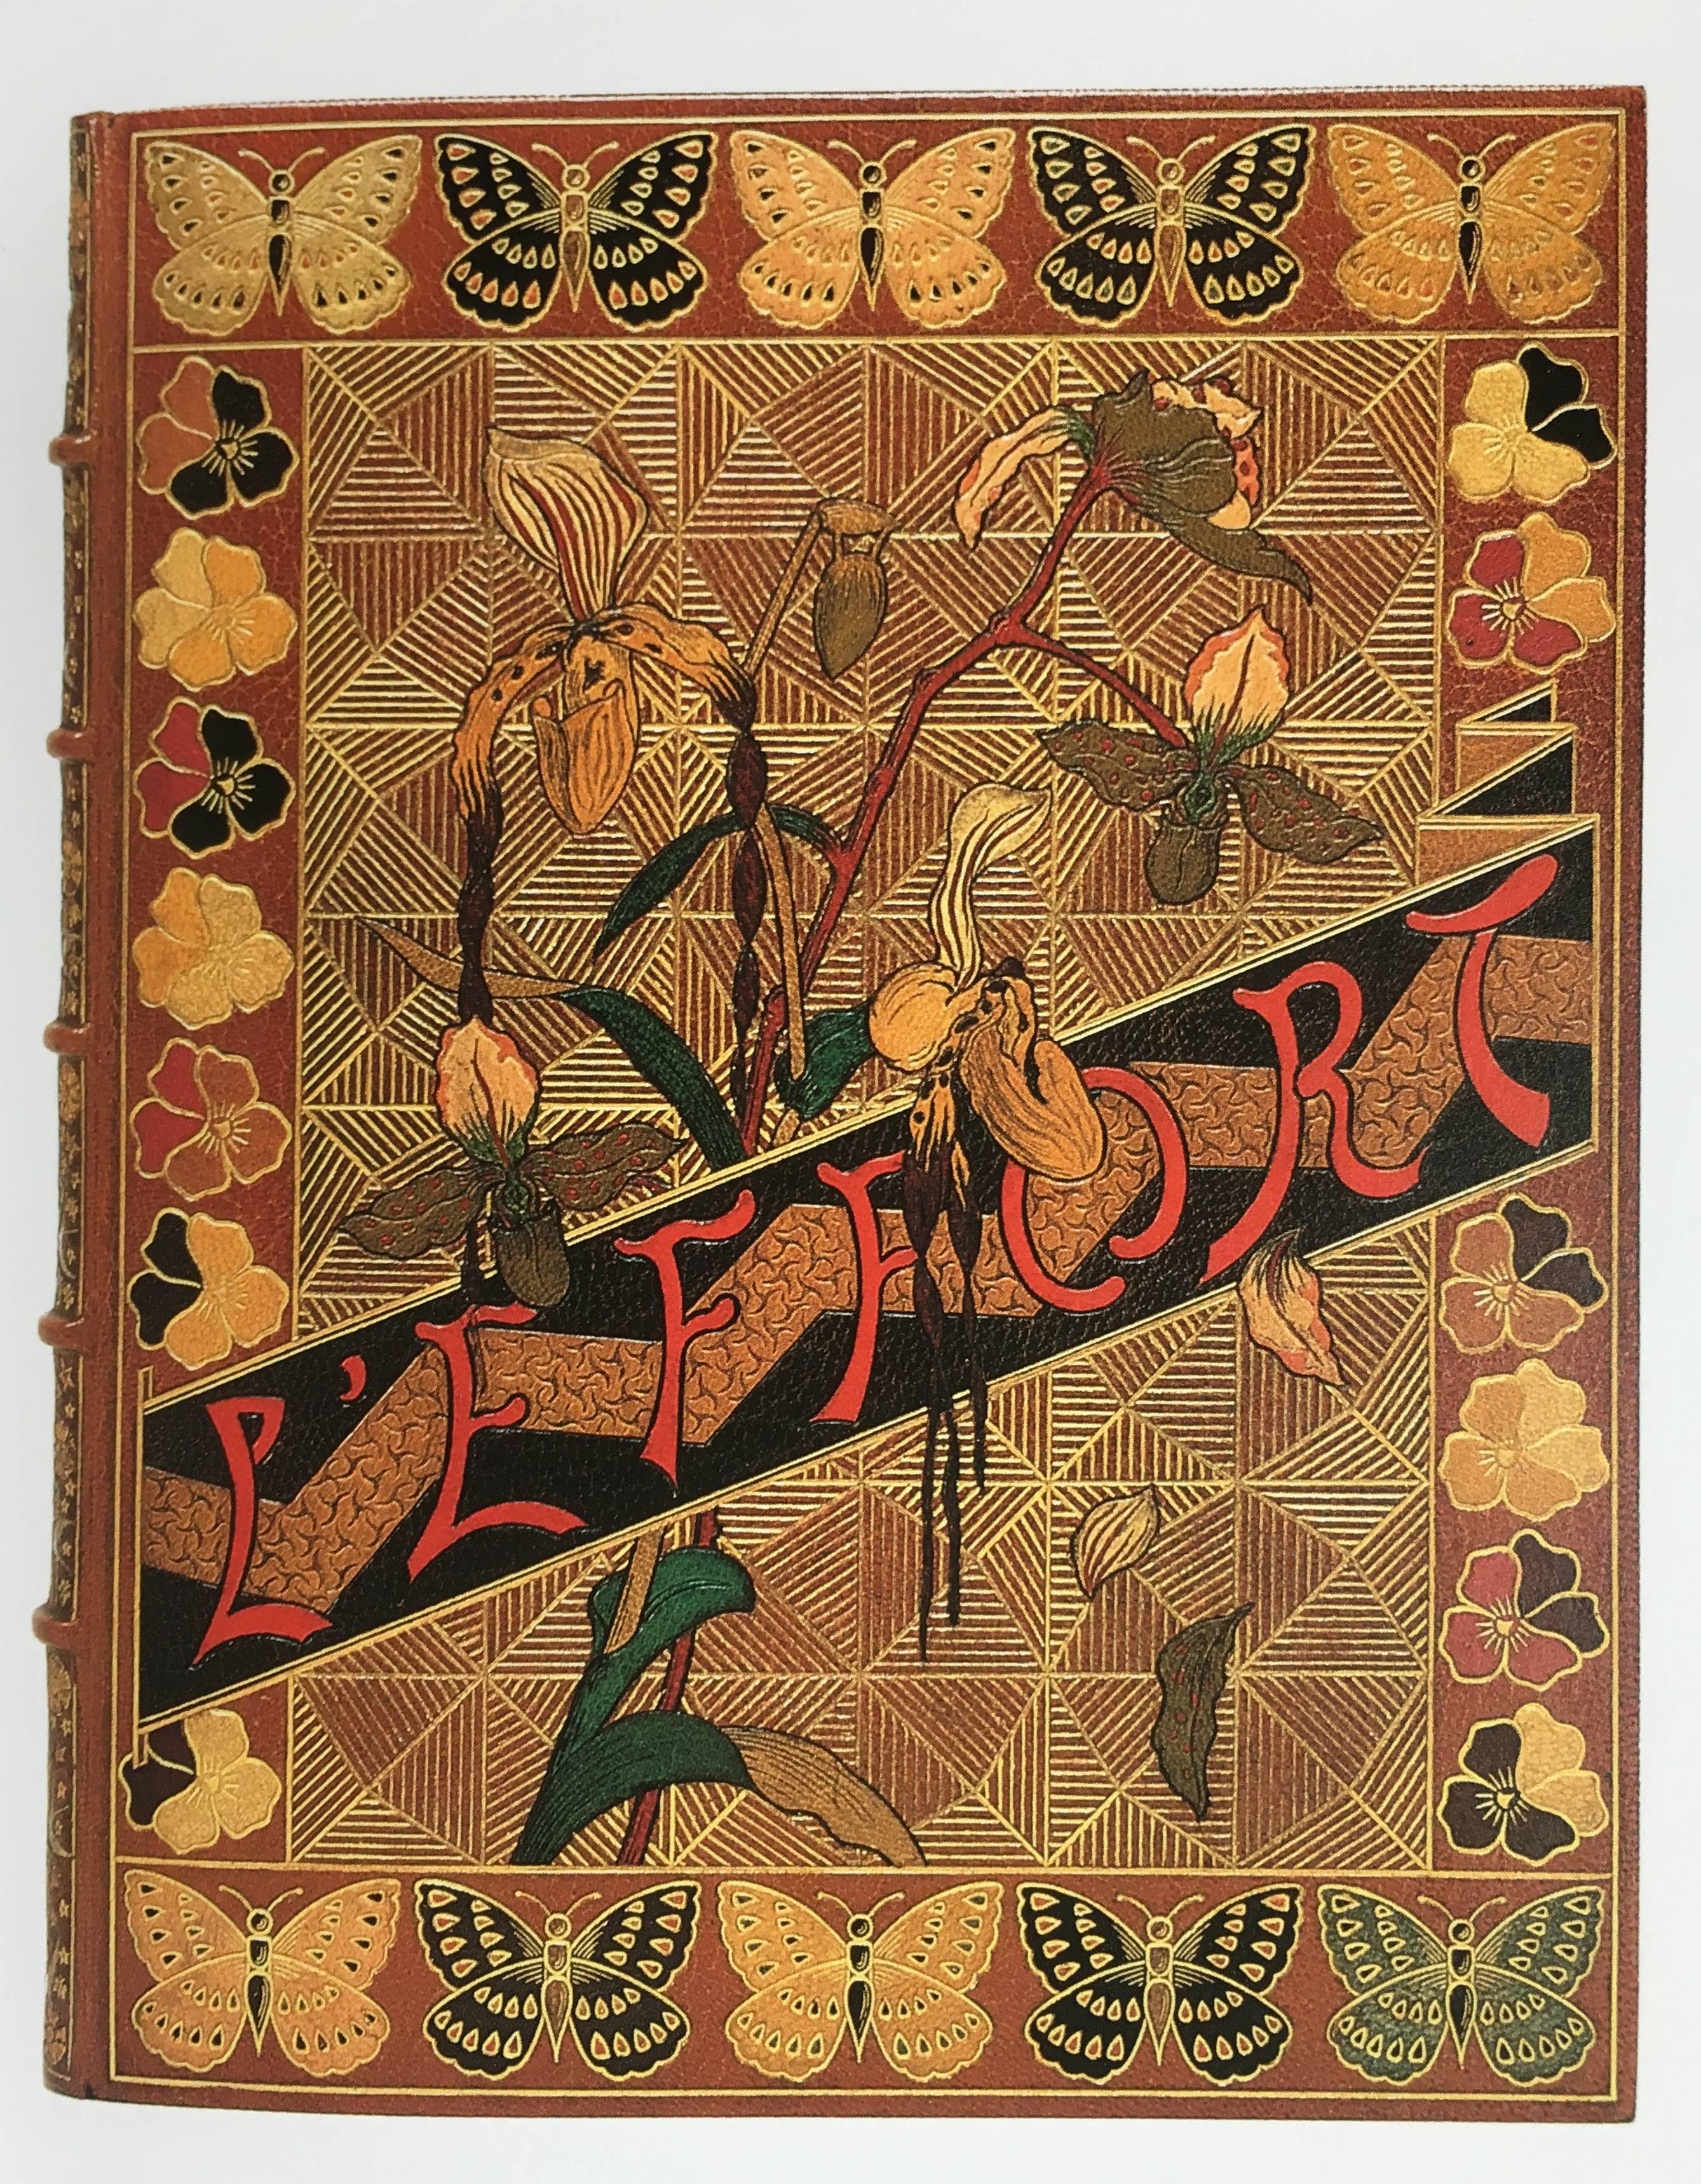 First edition, hardback, published by Thames and Hudson, 1989

Covering the creatively fruitful 60 years between 1880 and 1940 this book is the first major study of the Art Nouveau and Art Deco influence on bookbinding. The sinuous and organic